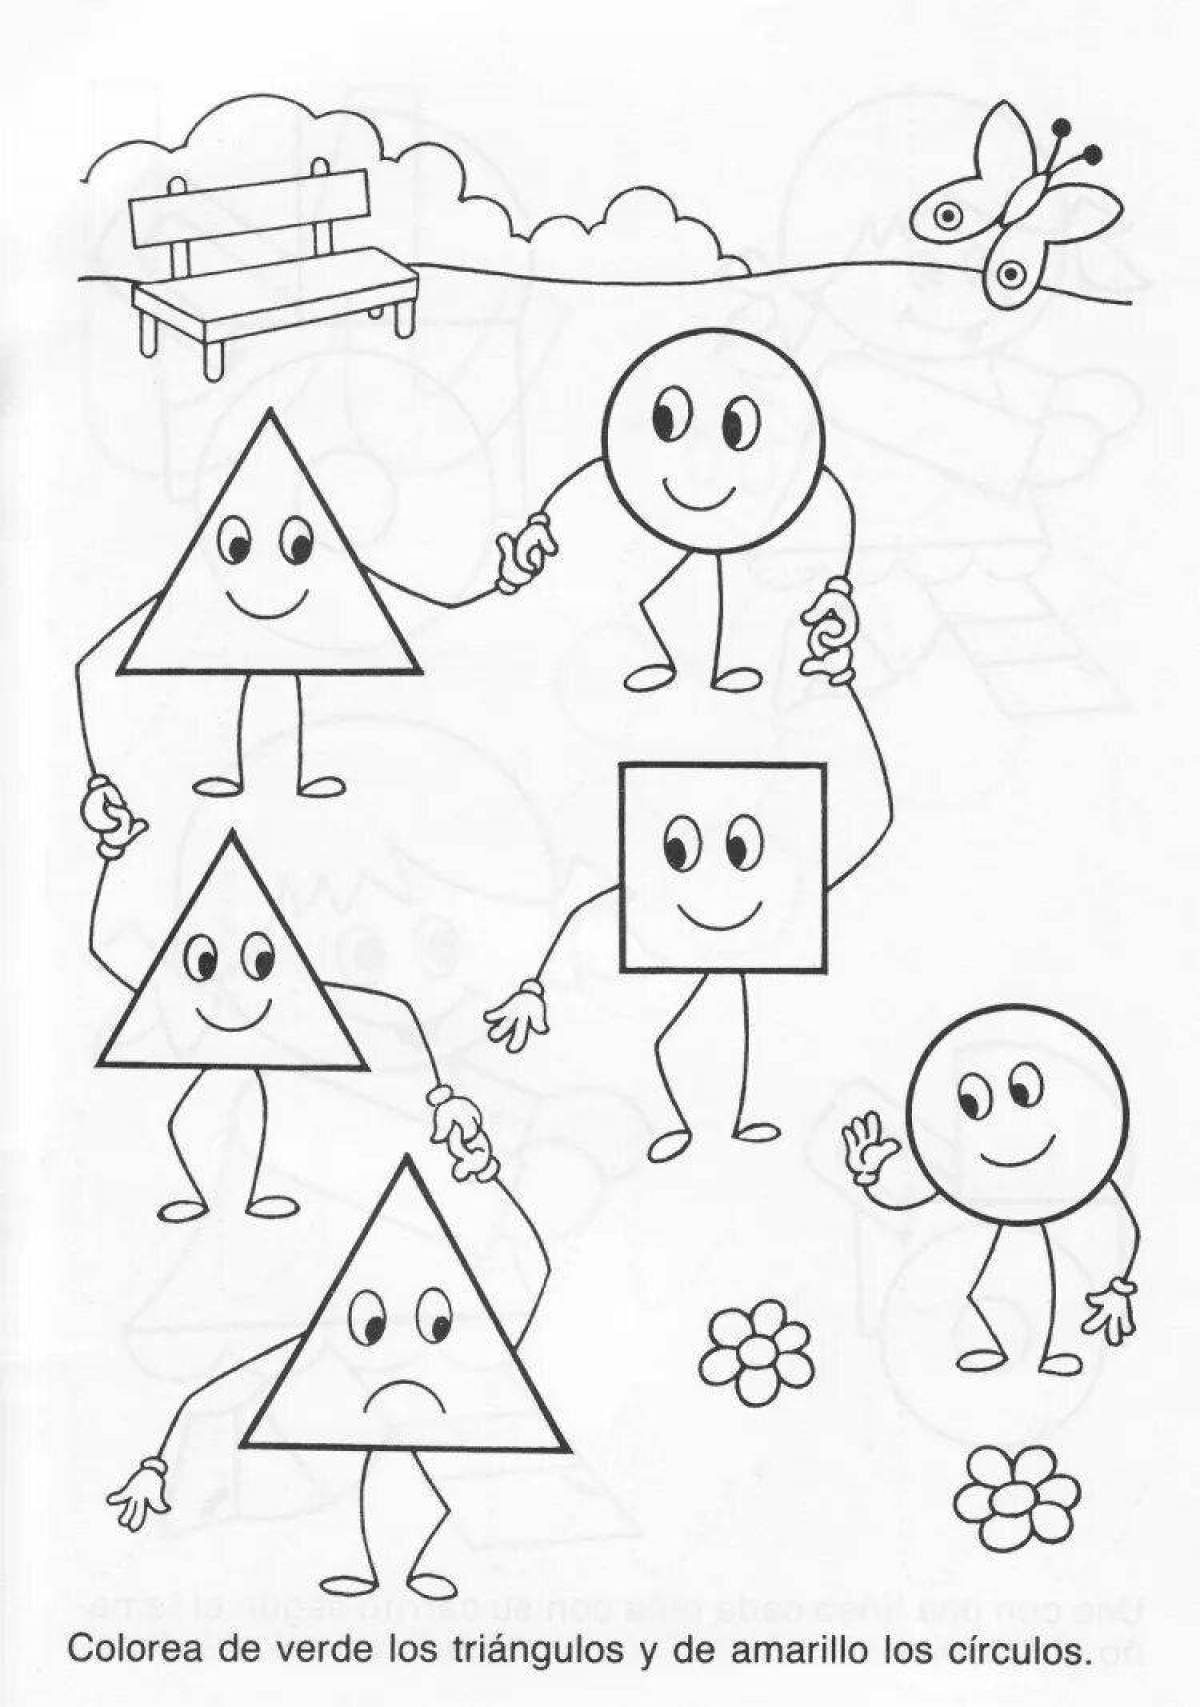 Coloring page of geometric shapes for preschoolers